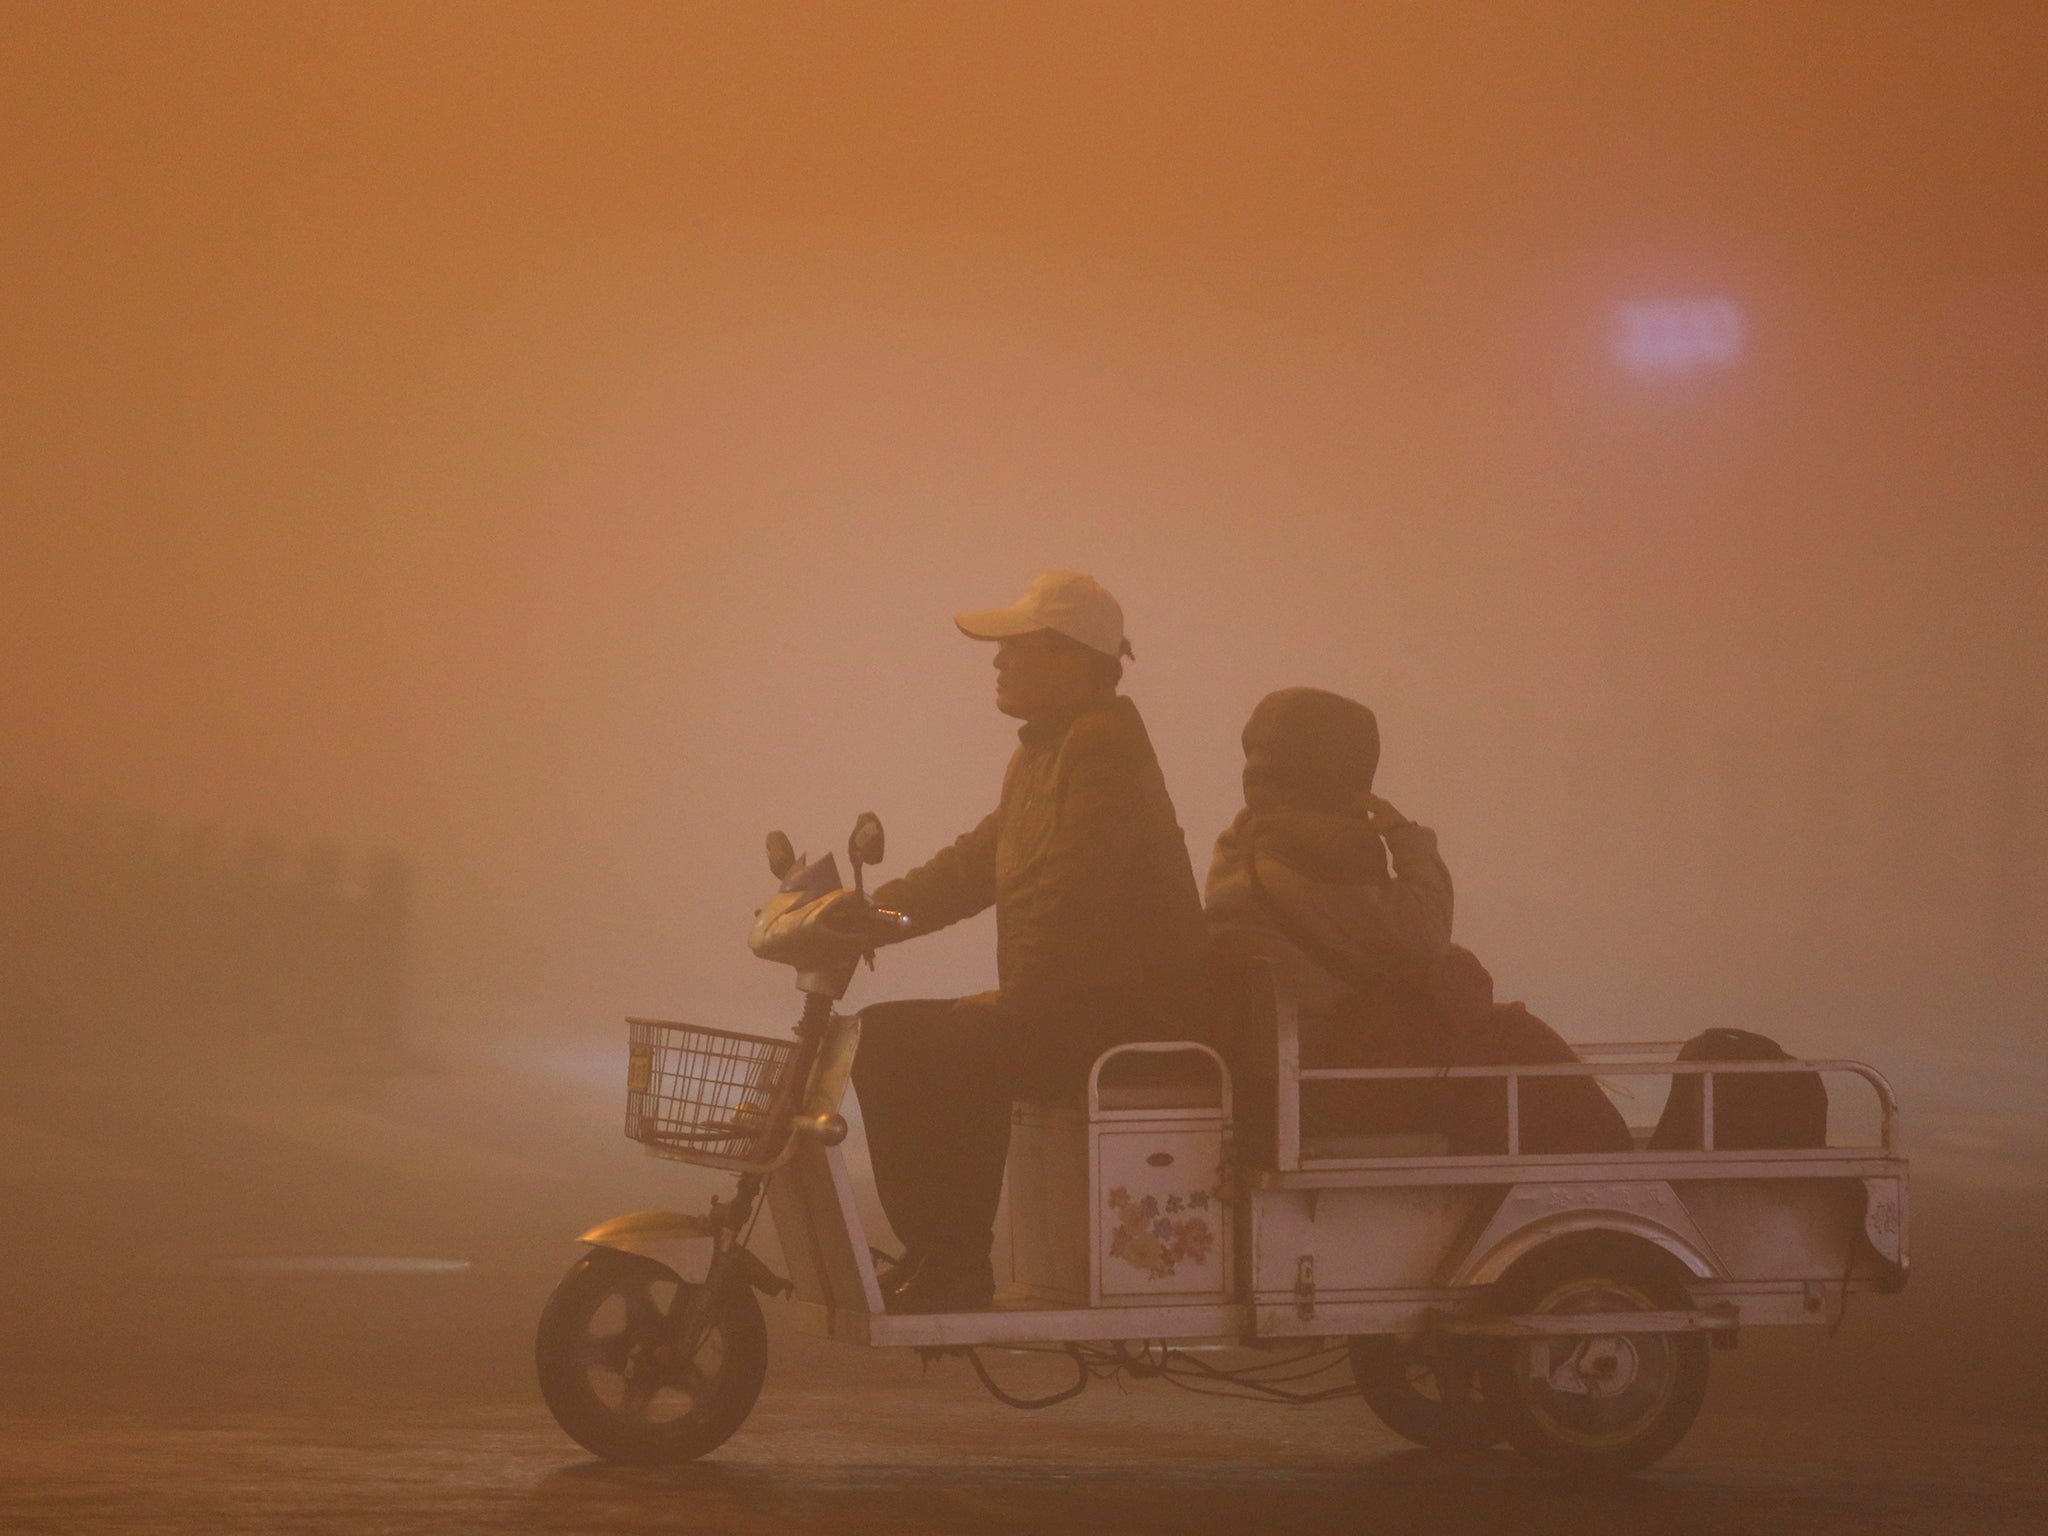 Industrial pollution remains a persistent problem in China's cities